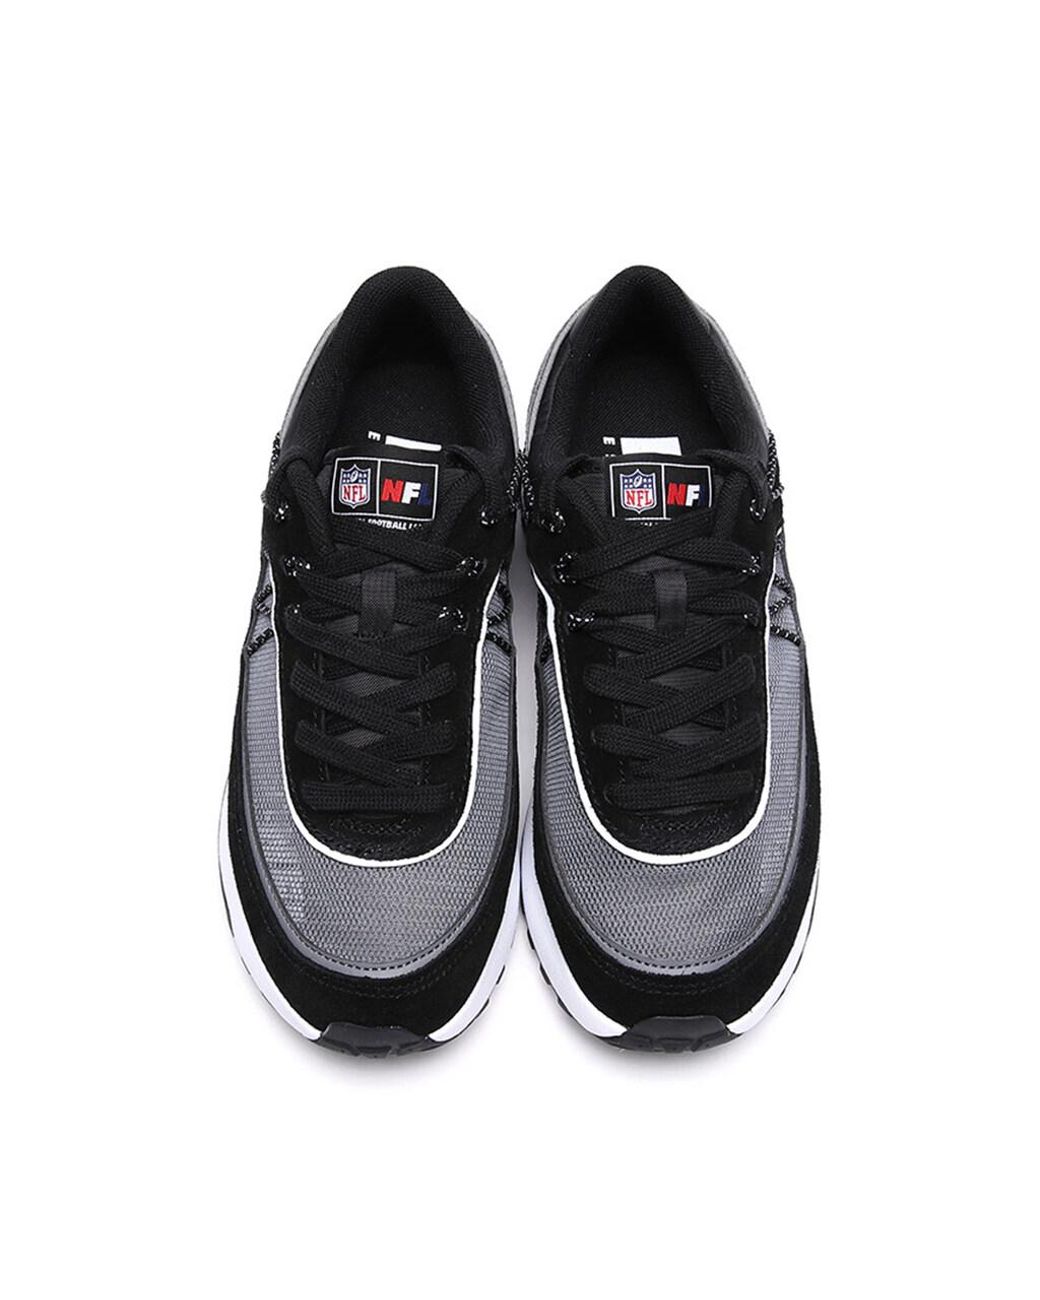 Nfl Willy Sneakers in Black | Lyst